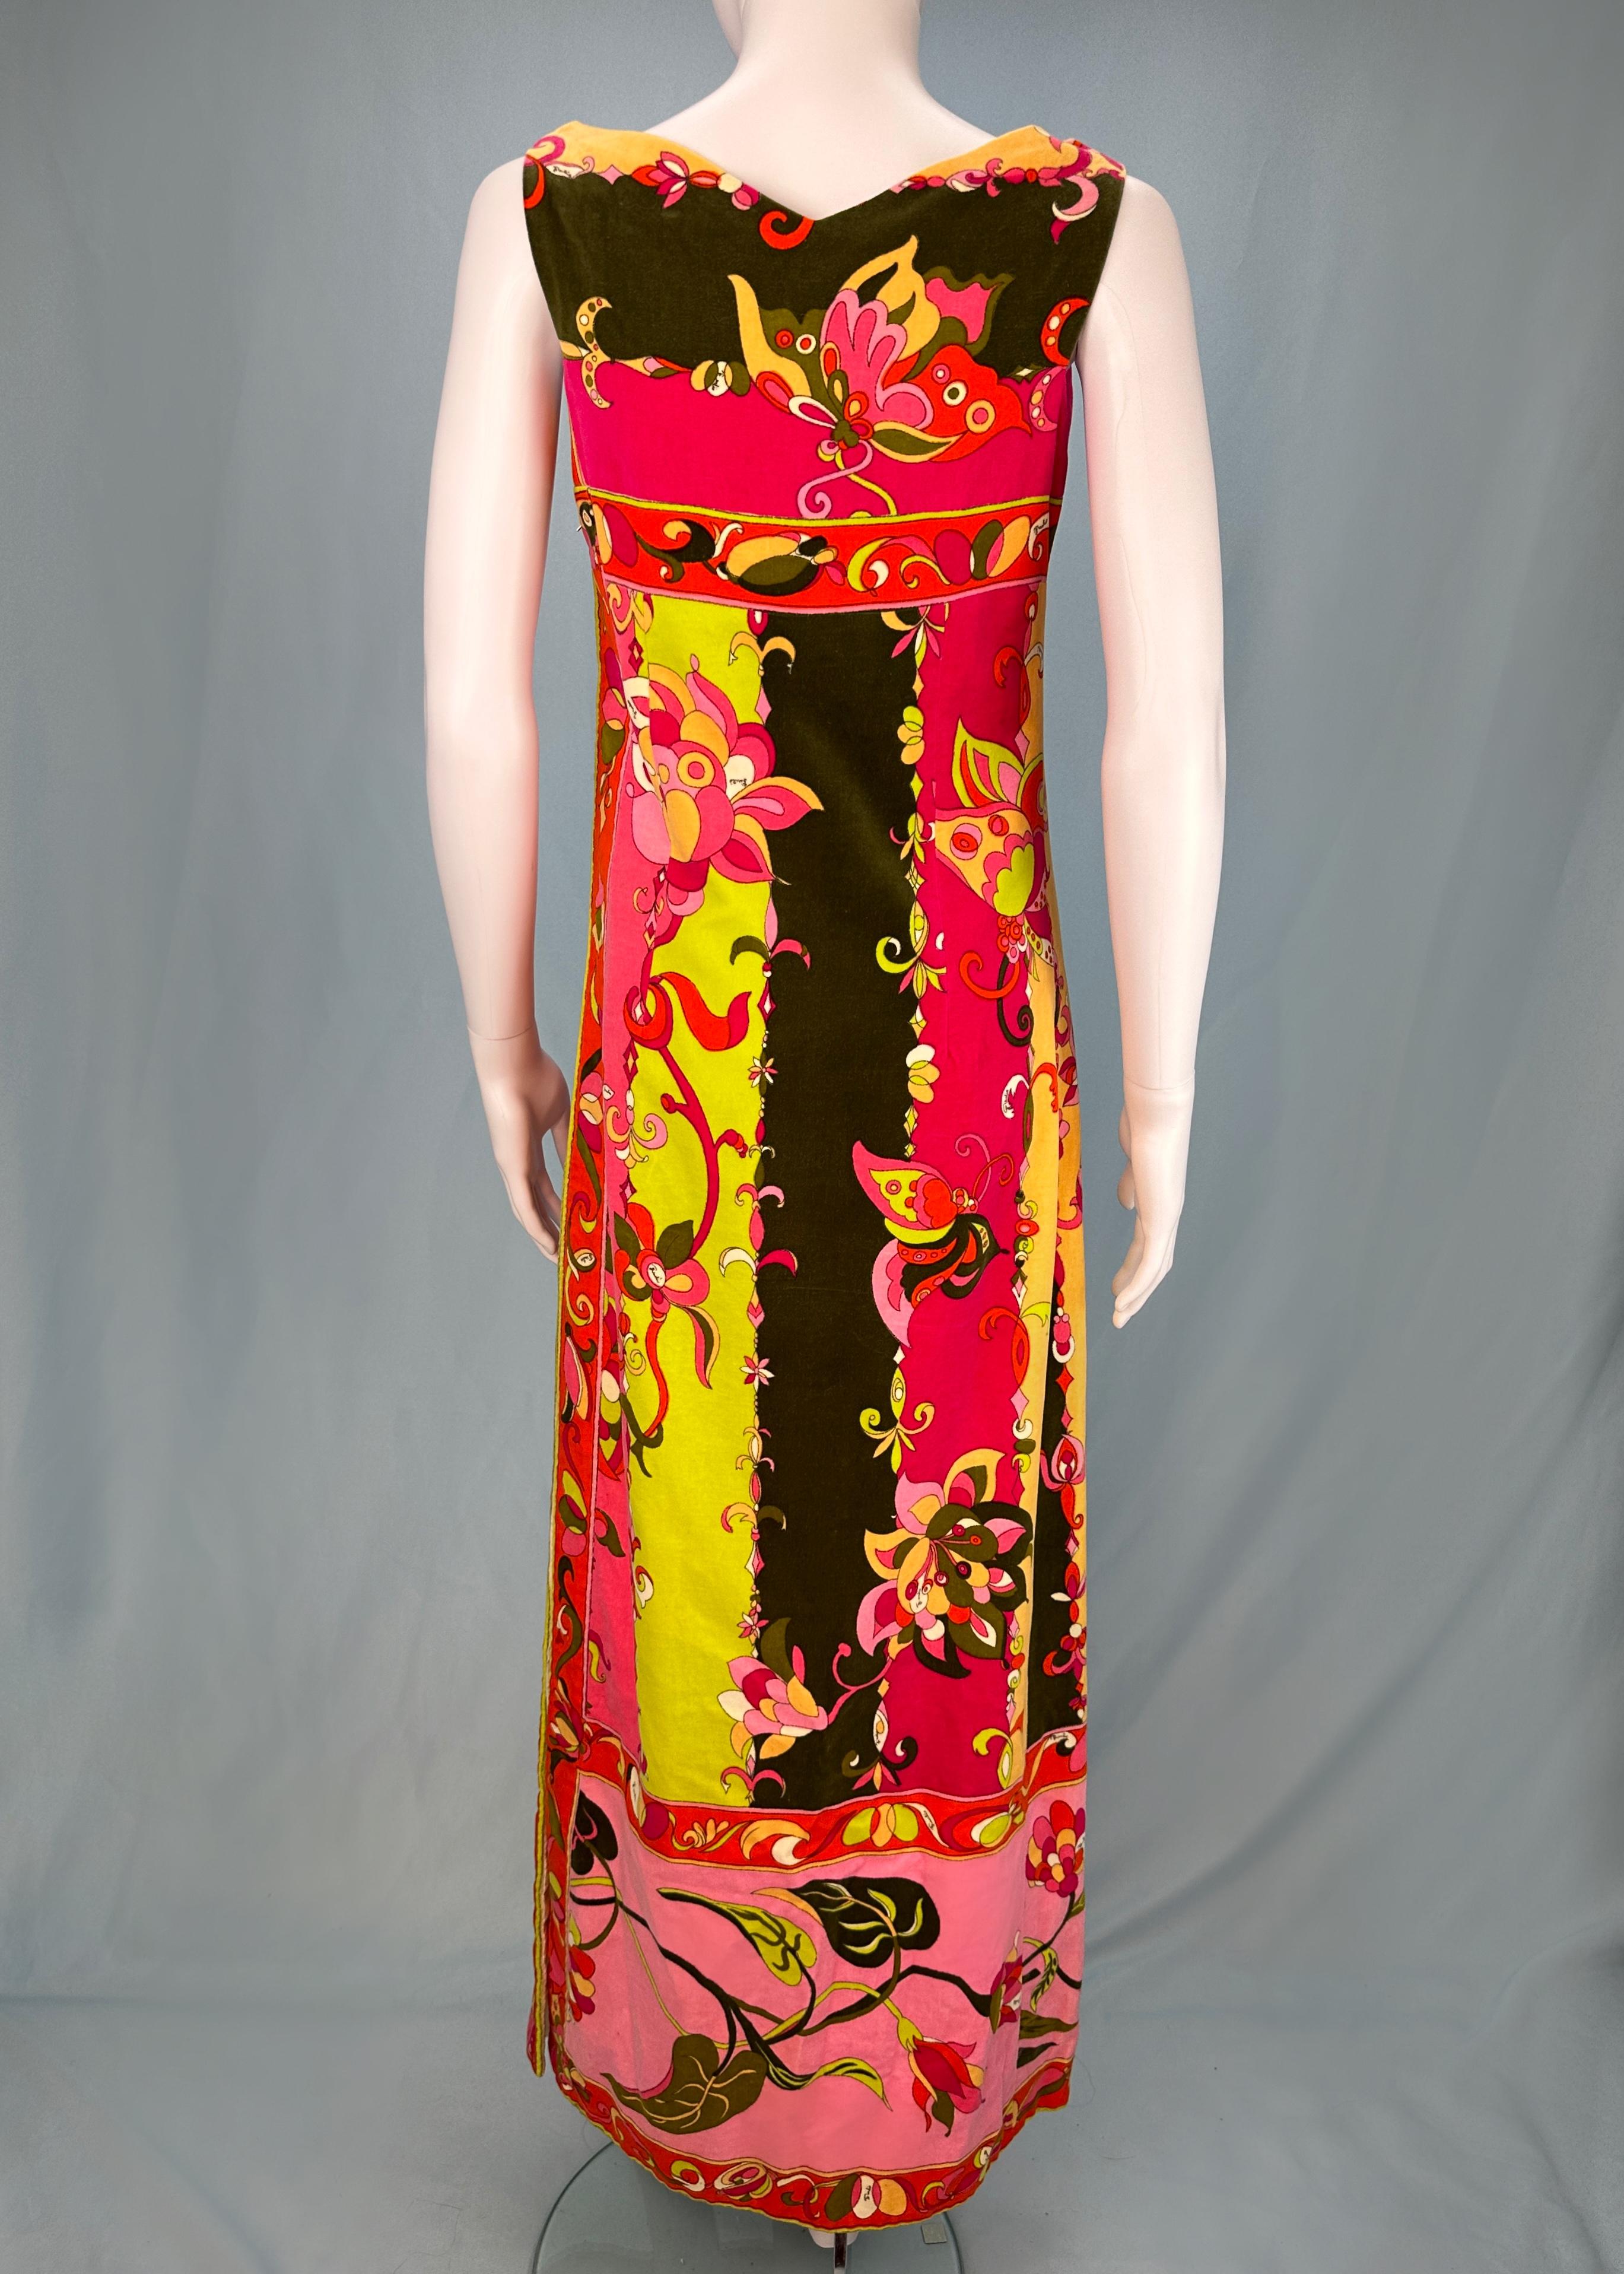 Emilio Pucci 1968 Pattern Velvet Maxi Dress In Excellent Condition For Sale In Hertfordshire, GB